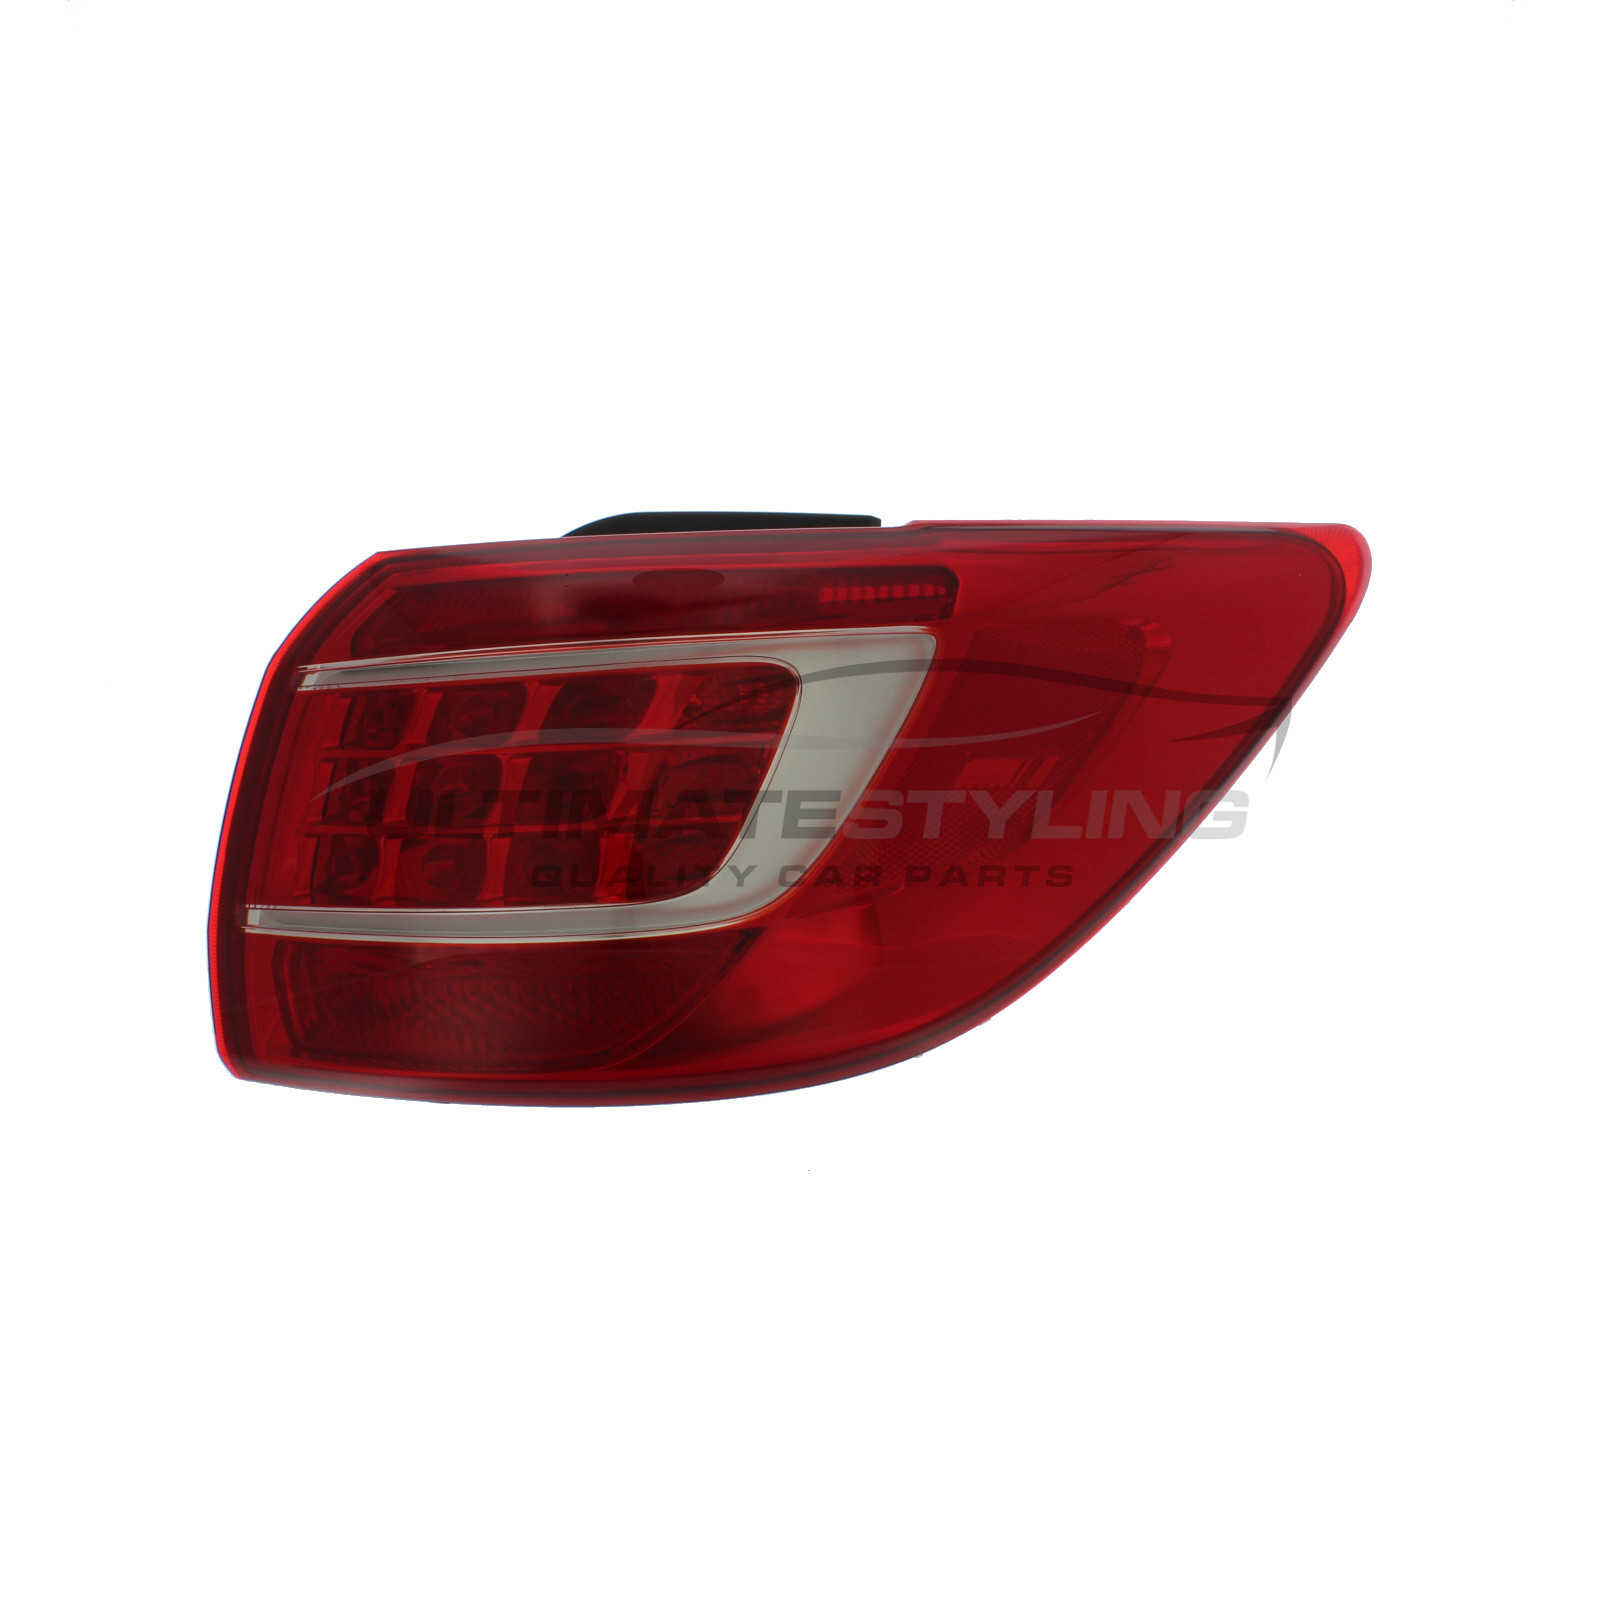 Kia Sportage 2010-2014 Non-LED Outer (Wing) Rear Light / Tail Light Excluding Bulb Holder Drivers Side (RH)